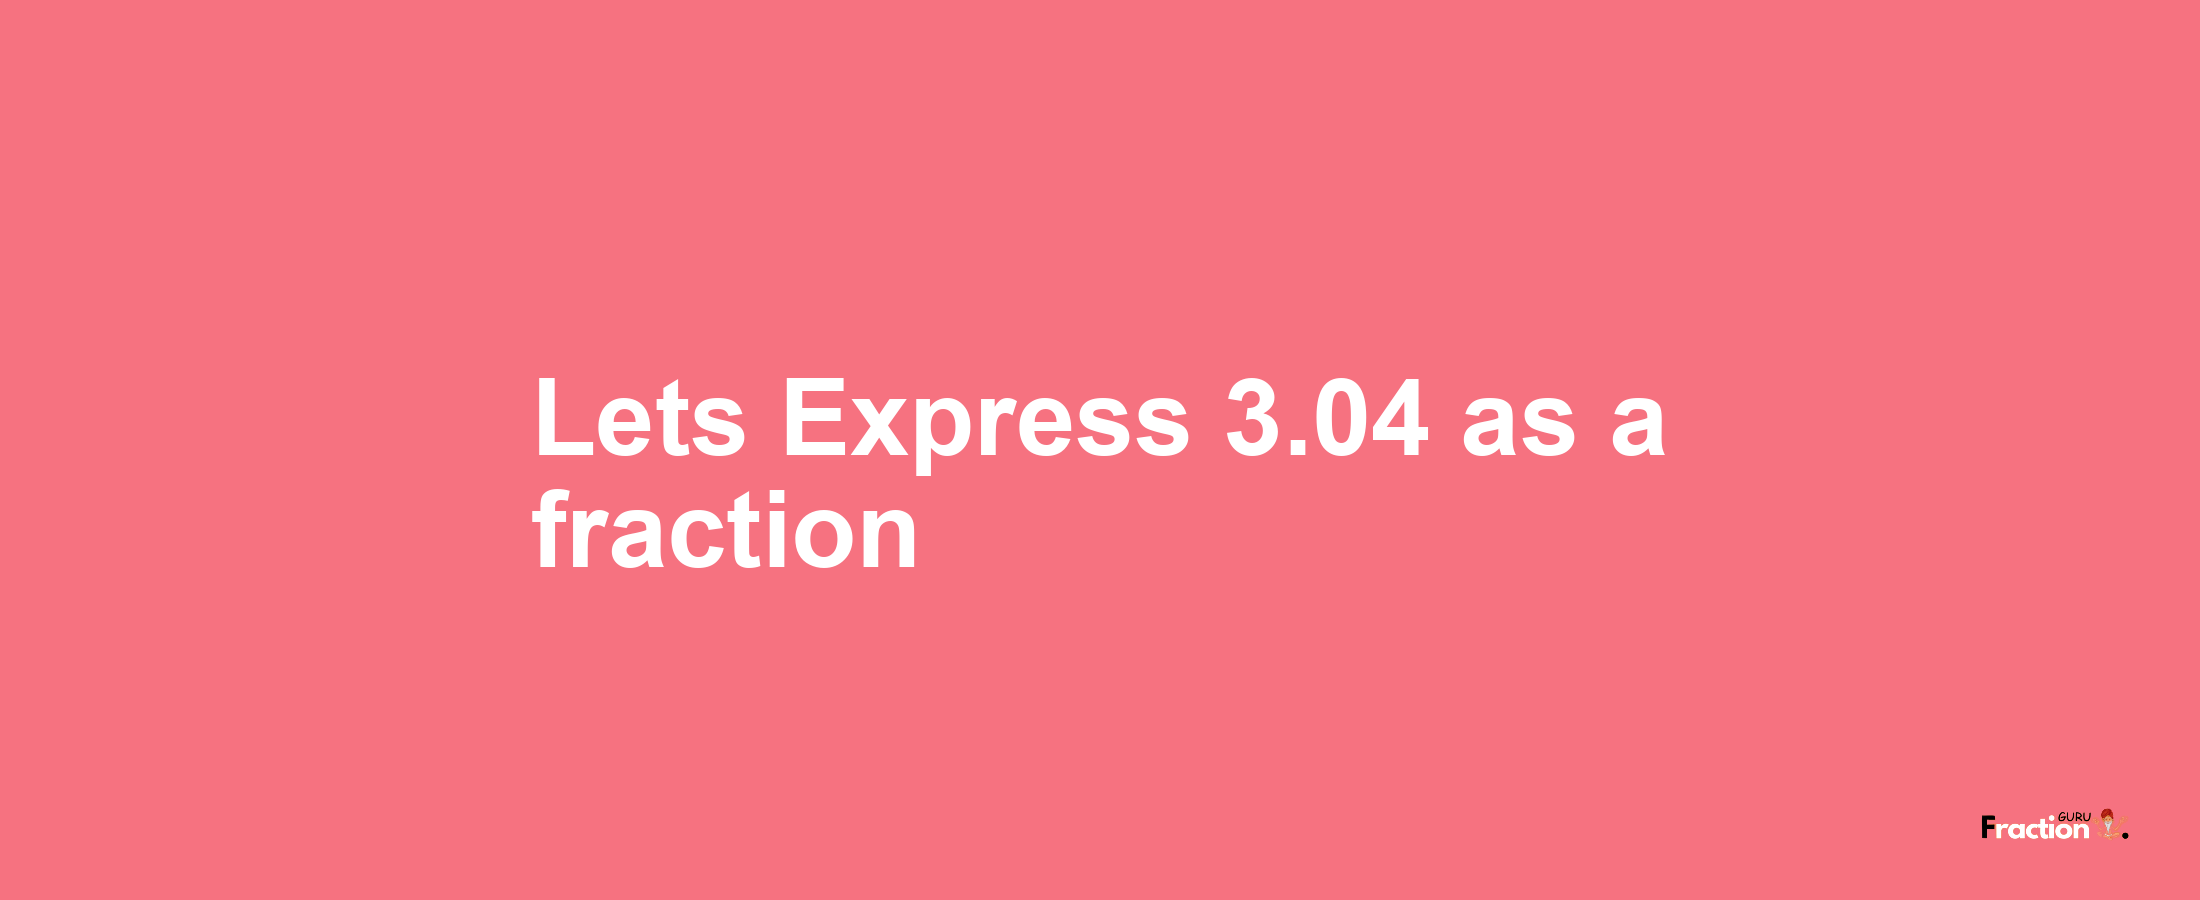 Lets Express 3.04 as afraction